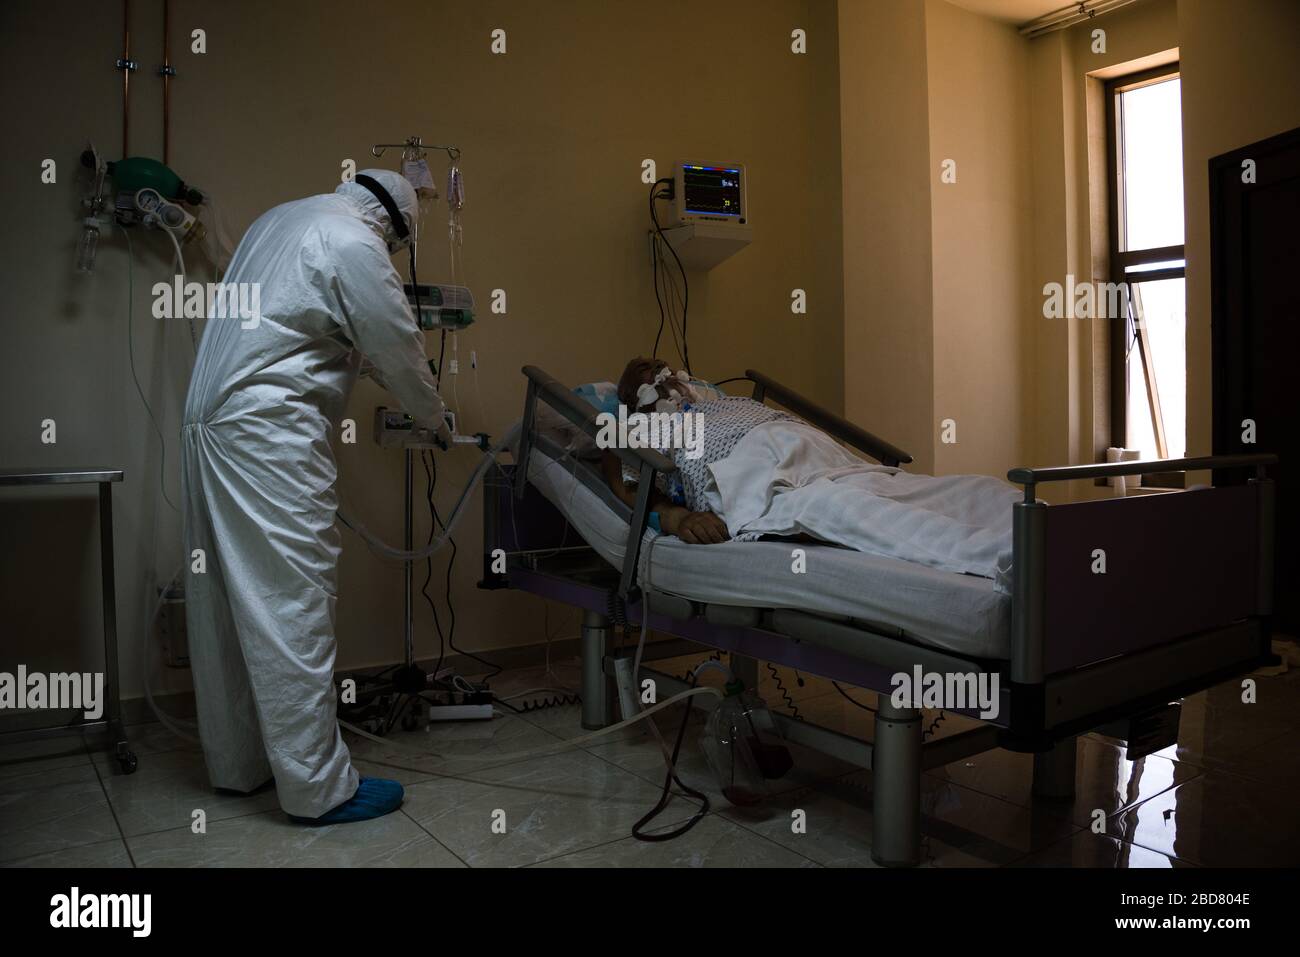 Douris, Lebanon, 7 April 2020. A medic tends to a COVID19 patient on Dar Al Amal University Hospital's COVID Ward A. One of two ICU and five total patients infected with the virus, this man is intubated and using a ventilator.  Elizabeth Fitt Credit: Elizabeth Fitt/Alamy Live News Stock Photo